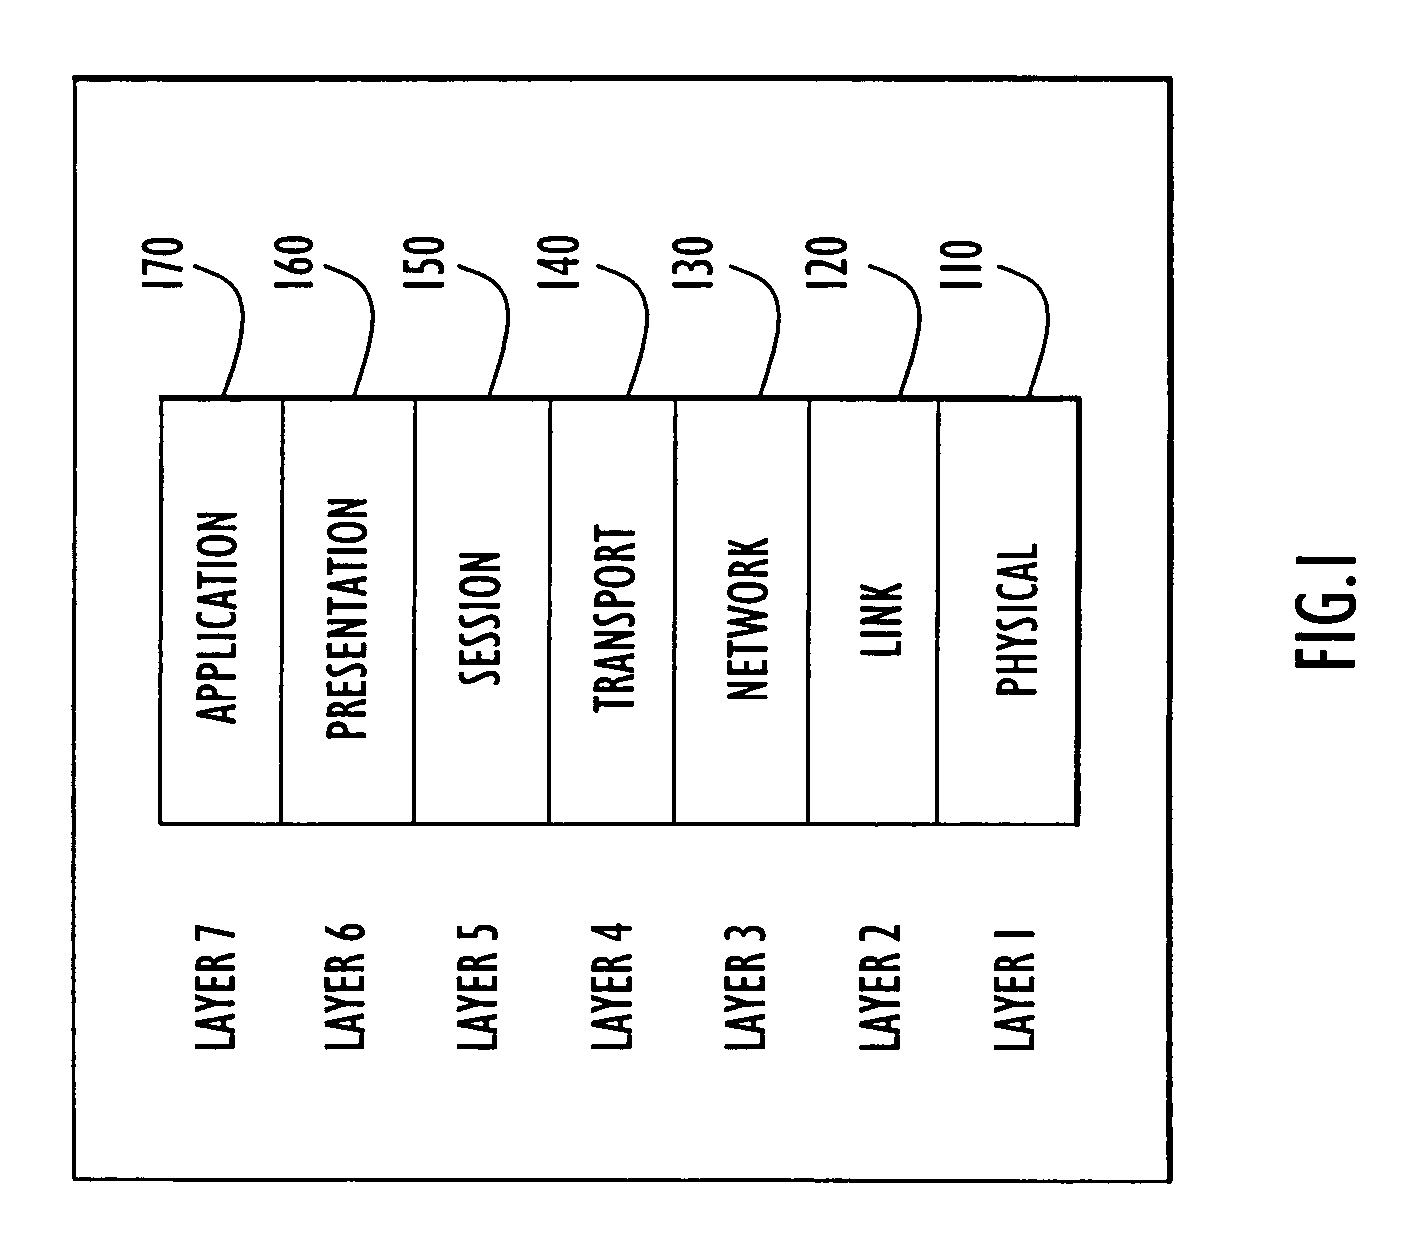 Method and system for transferring data in a communications network using redundant communication paths